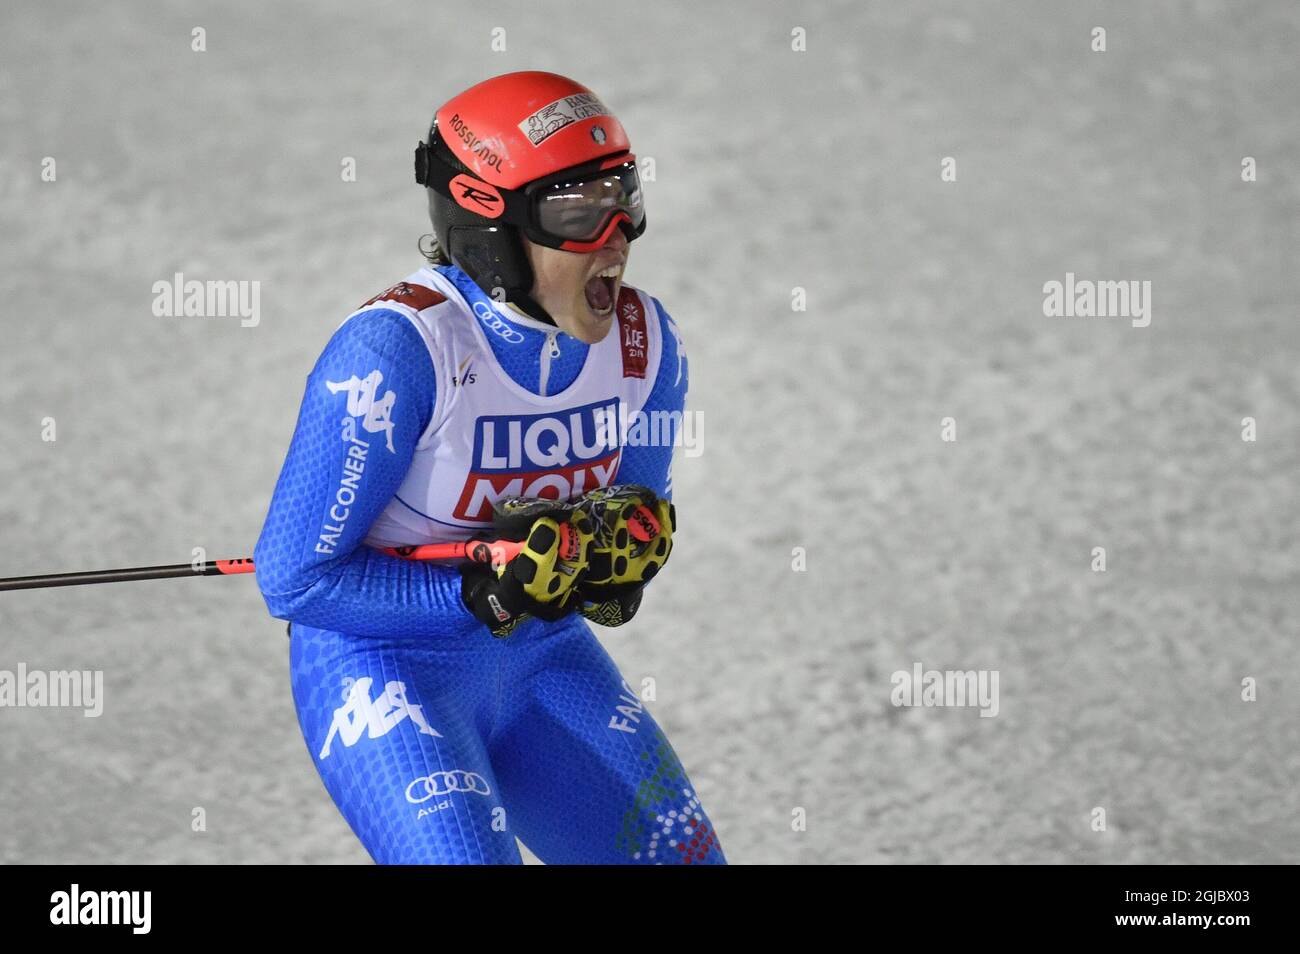 ItalyÂ´s Federica Brignone placed fifth in the women's giant slalom at the FIS Alpine Ski World Championships in Are, Sweden, Feb.14, 2019. Photo: Anders Wiklund/ TT  Stock Photo